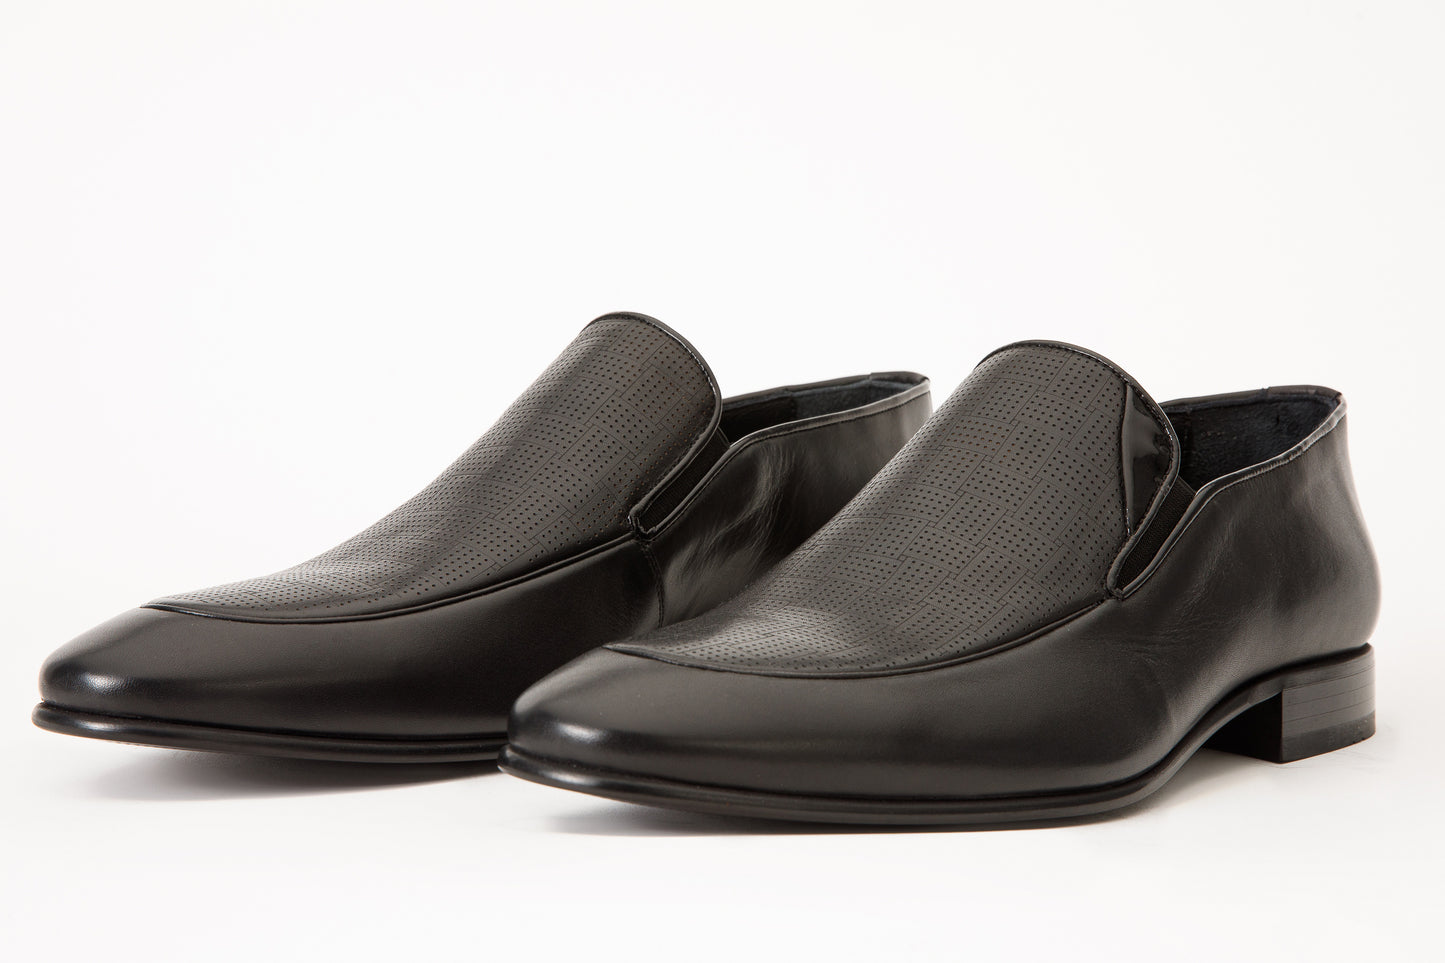 The Migues Black Leather Loafer Men Shoe